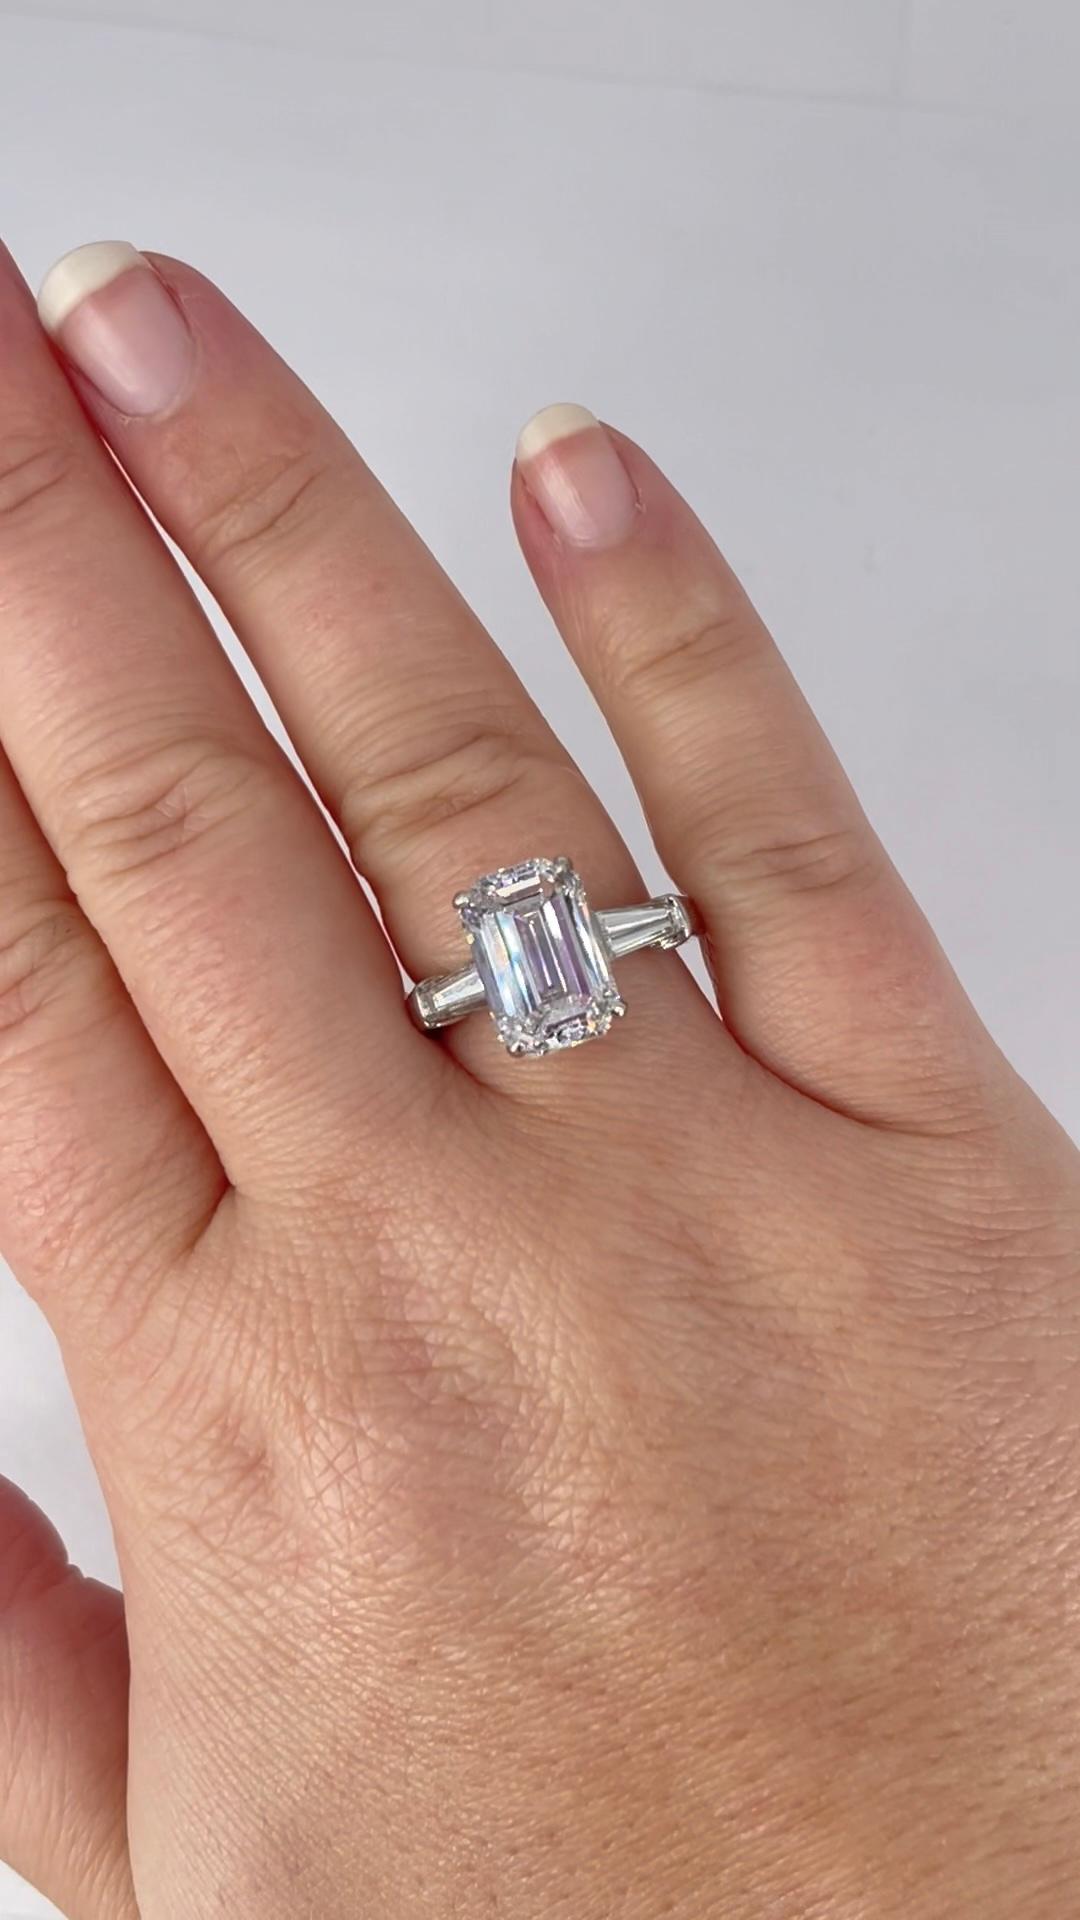 This elegant engagement ring by David Webb is a stunning example of timeless quality and craftsmanship. The ring showcases a 5.01 carat emerald cut diamond, certified by GIA as F color and VS1 clarity. The F color grade is colorless, and VS1 clarity